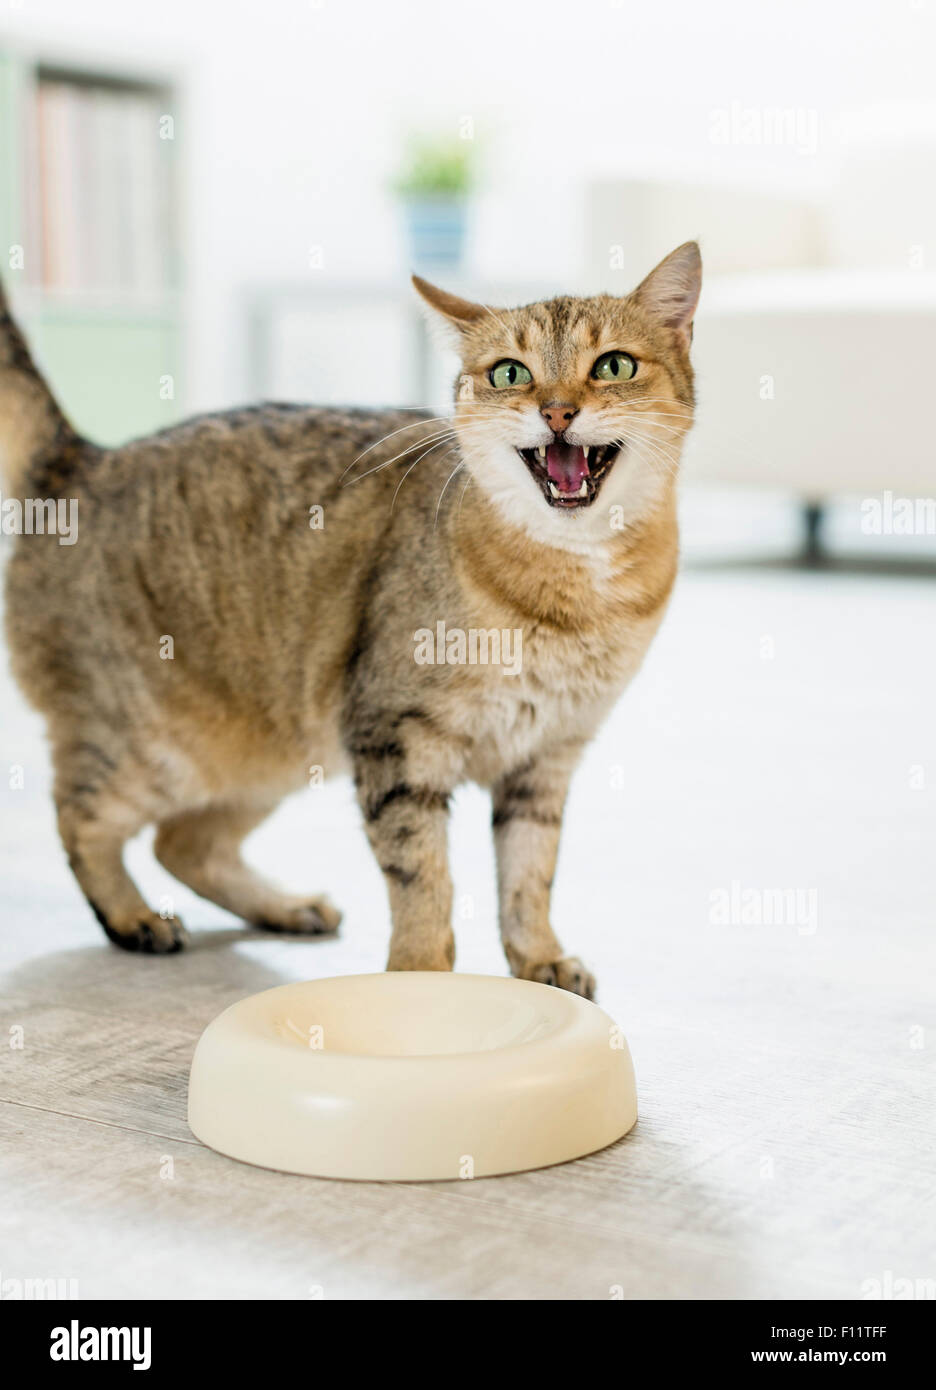 Domestic cat Tabby adult standing next to empty feeding bowl, meowing reproachfully Stock Photo